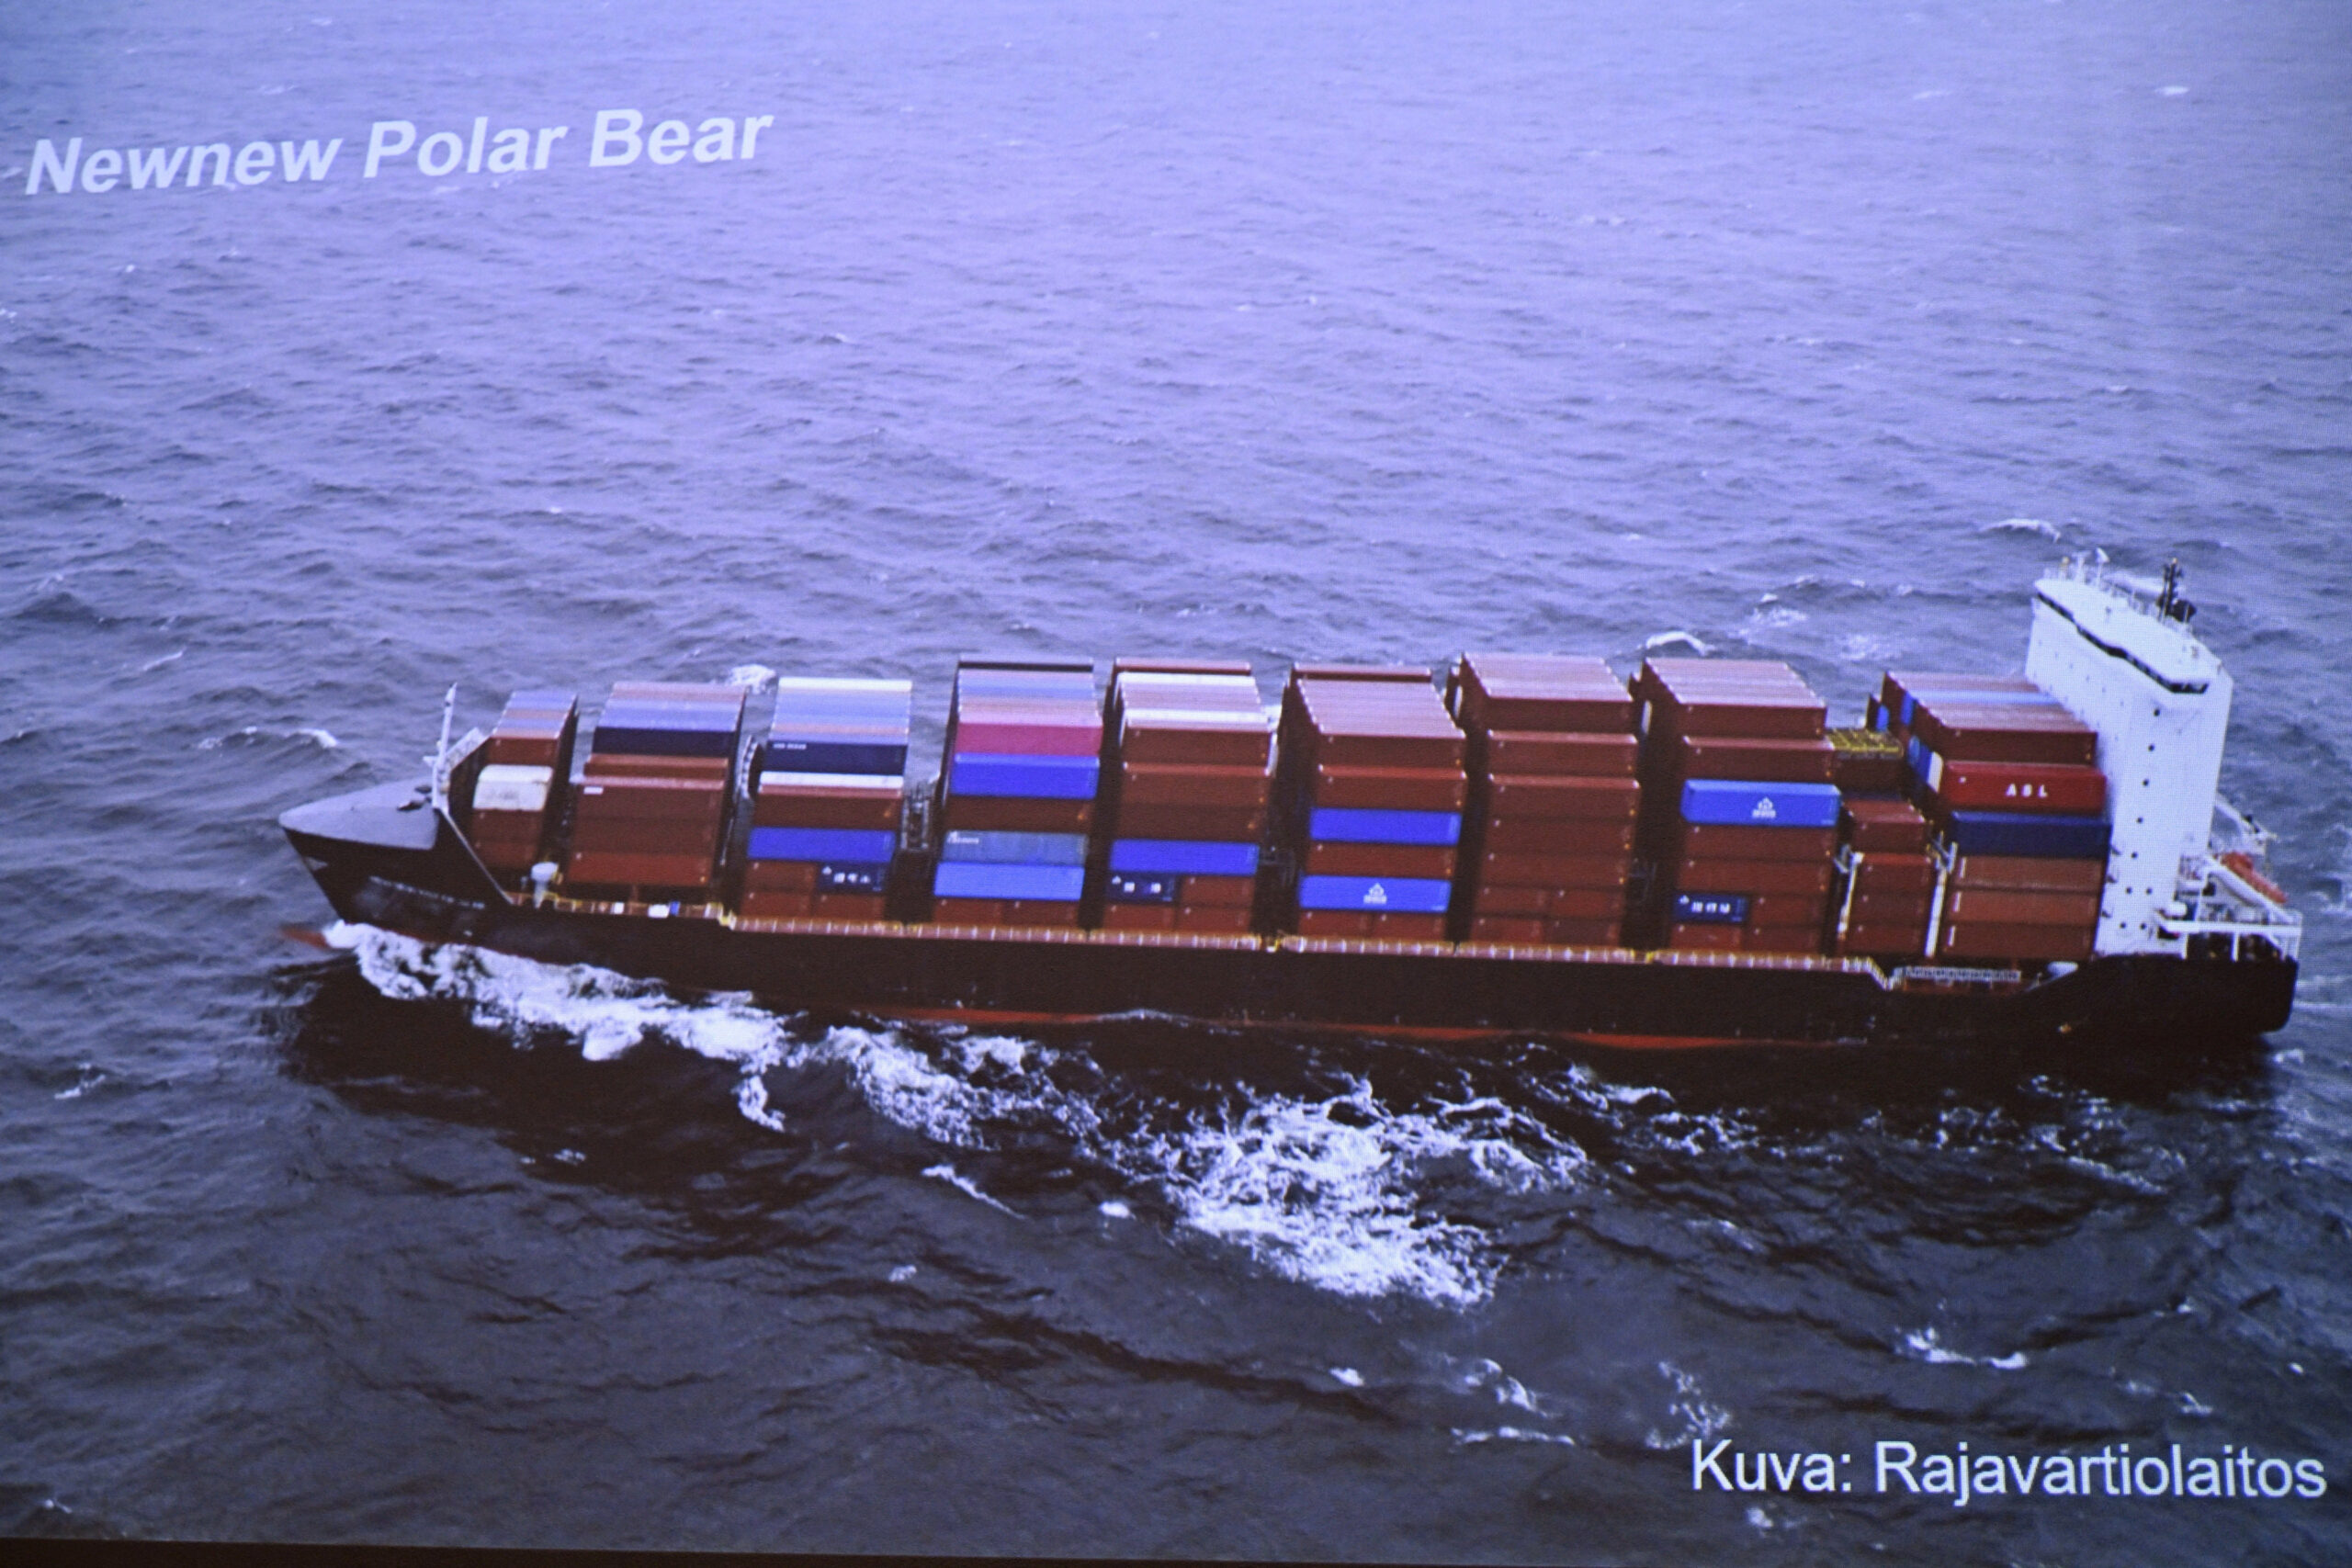 Finnish Border Guard's photo of a Hong Kong registered cargo ship 'Newnew Polar Bear', which was spotted moving close to the Balticconnector gas line, during the joint press conference of the investigation of the possible attack on the Balticconnector gas line on 8th Oct., 2023 between Finland and Estonia at the headquarters of the National Bureau of Investigation in Vantaa, Finland, 24 October 2023. Lehtikuva/HEIKKI SAUKKOMAA via REUTERS